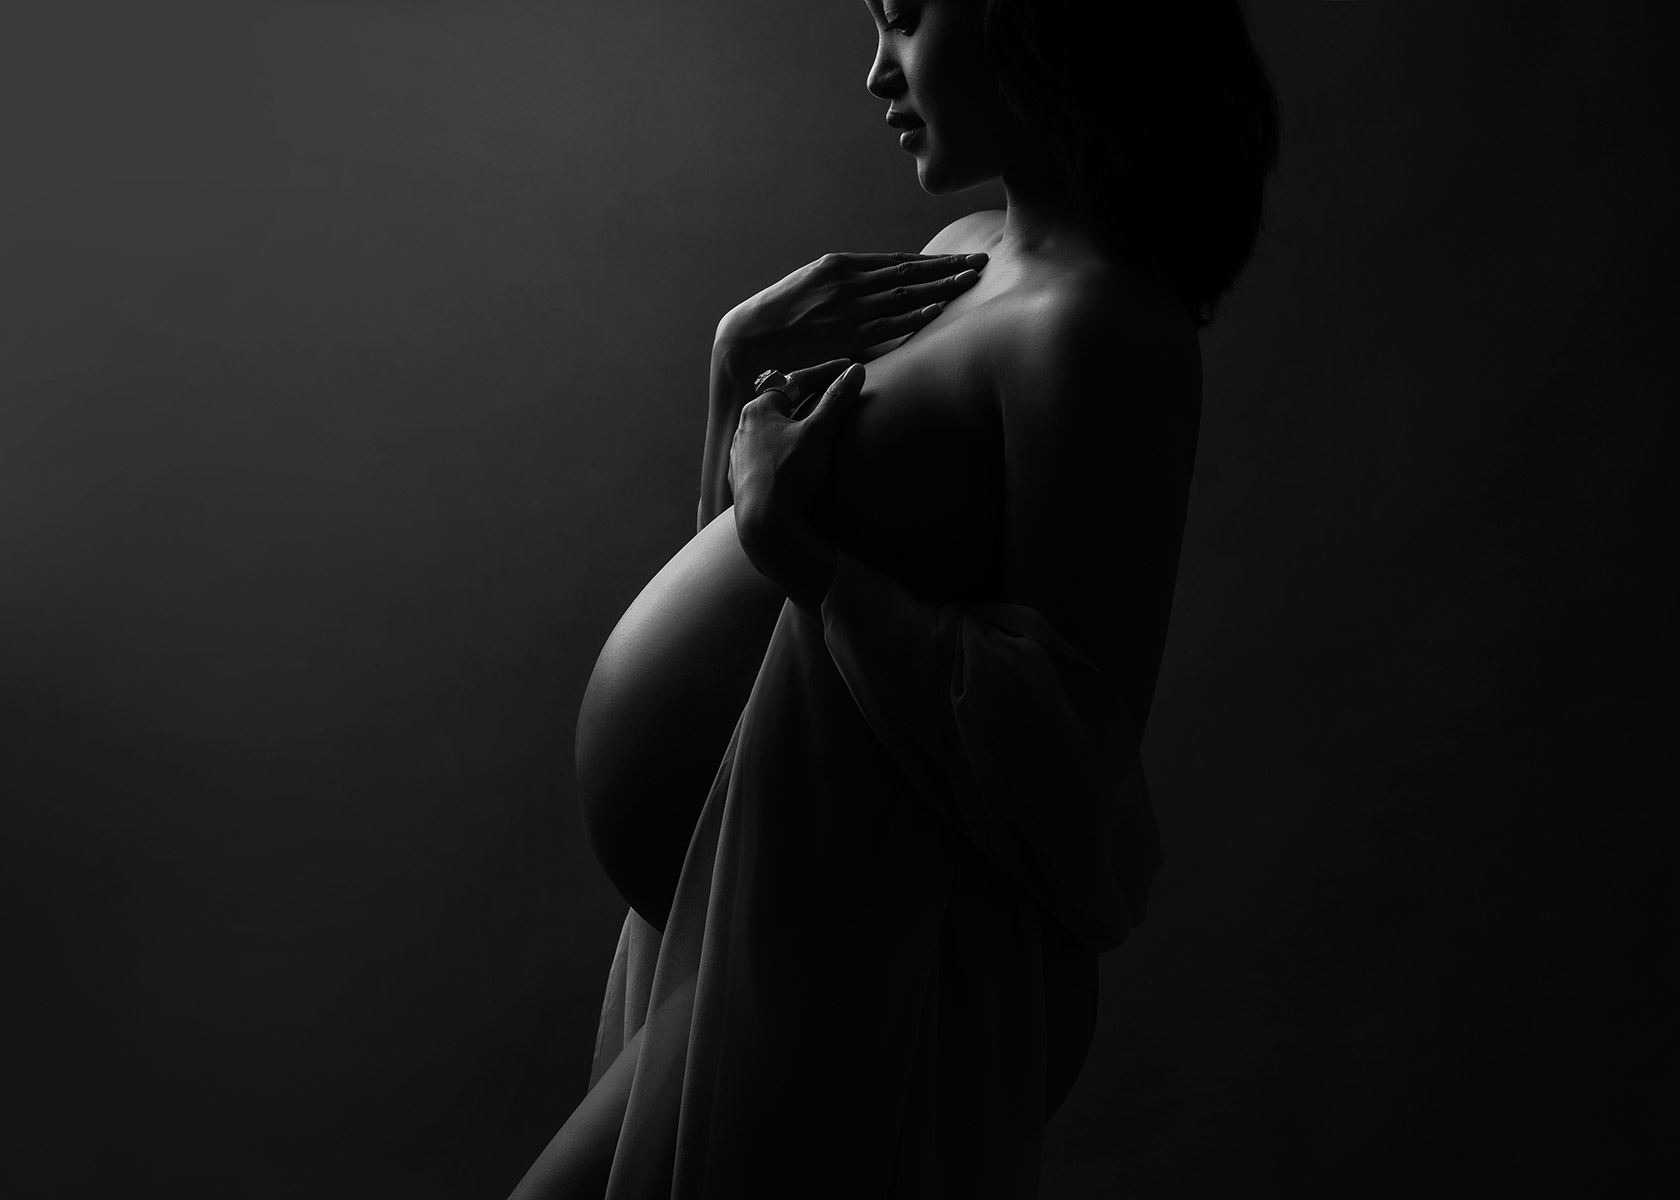 Silhouette photo showing the contours of a pregnant woman